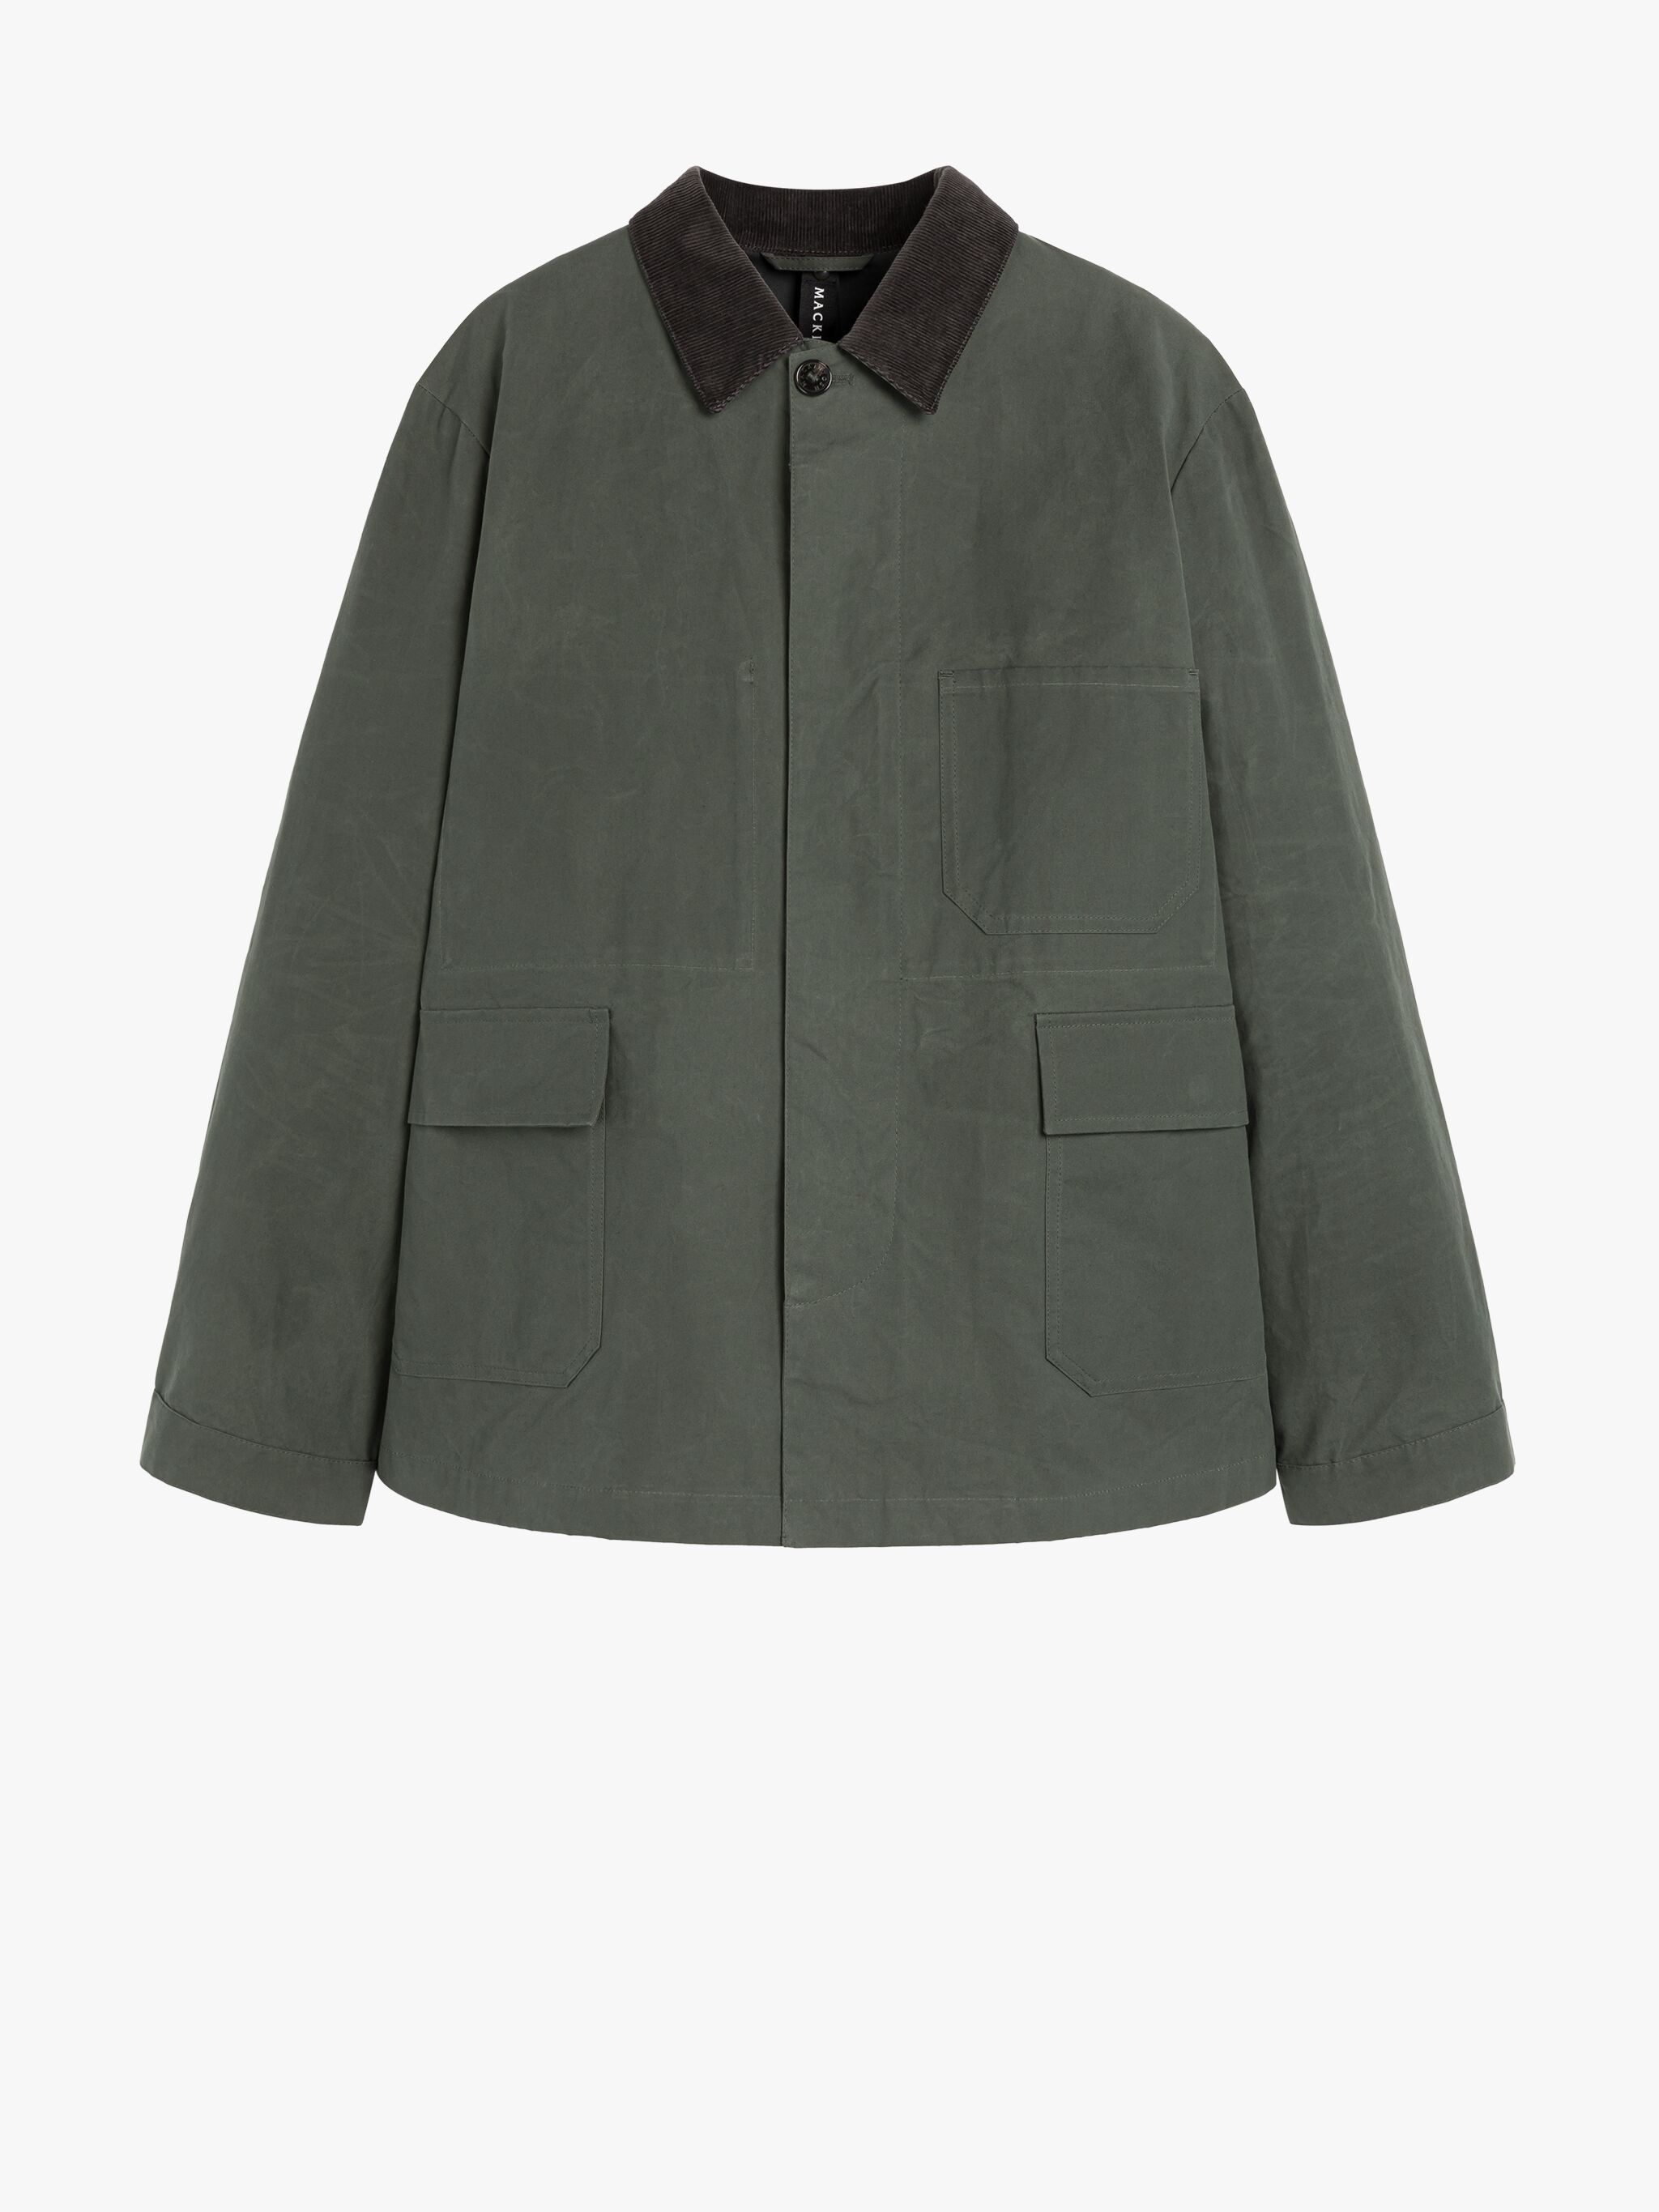 DRIZZLE GREEN WAXED COTTON CHORE JACKET - 1